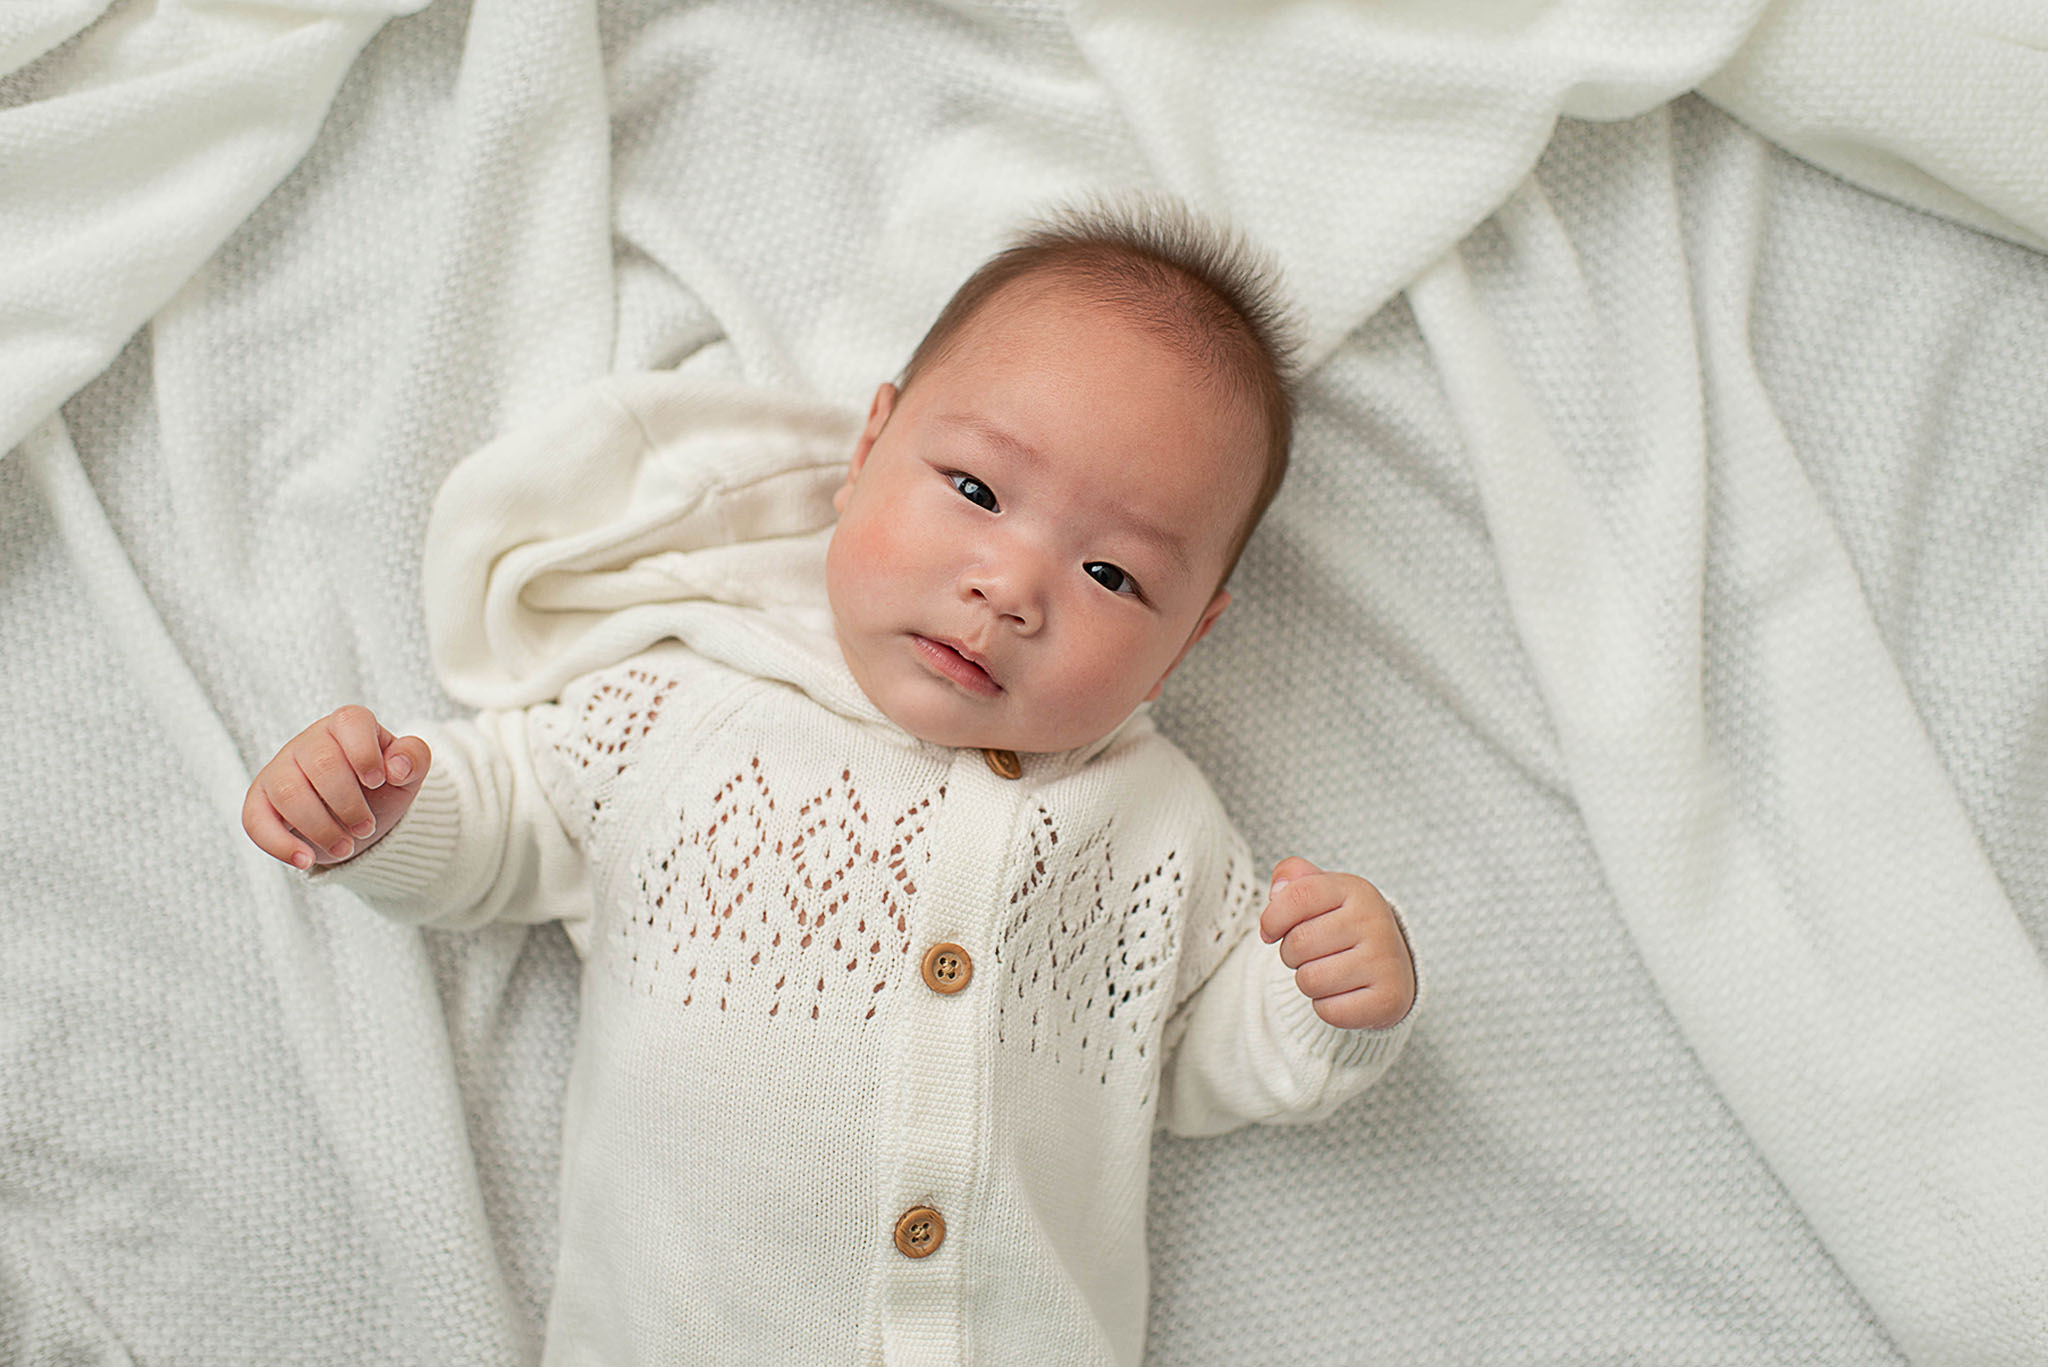 A newborn baby lays in a knit sweater onesit on a white blanket with eyes open Jacksonville midwives